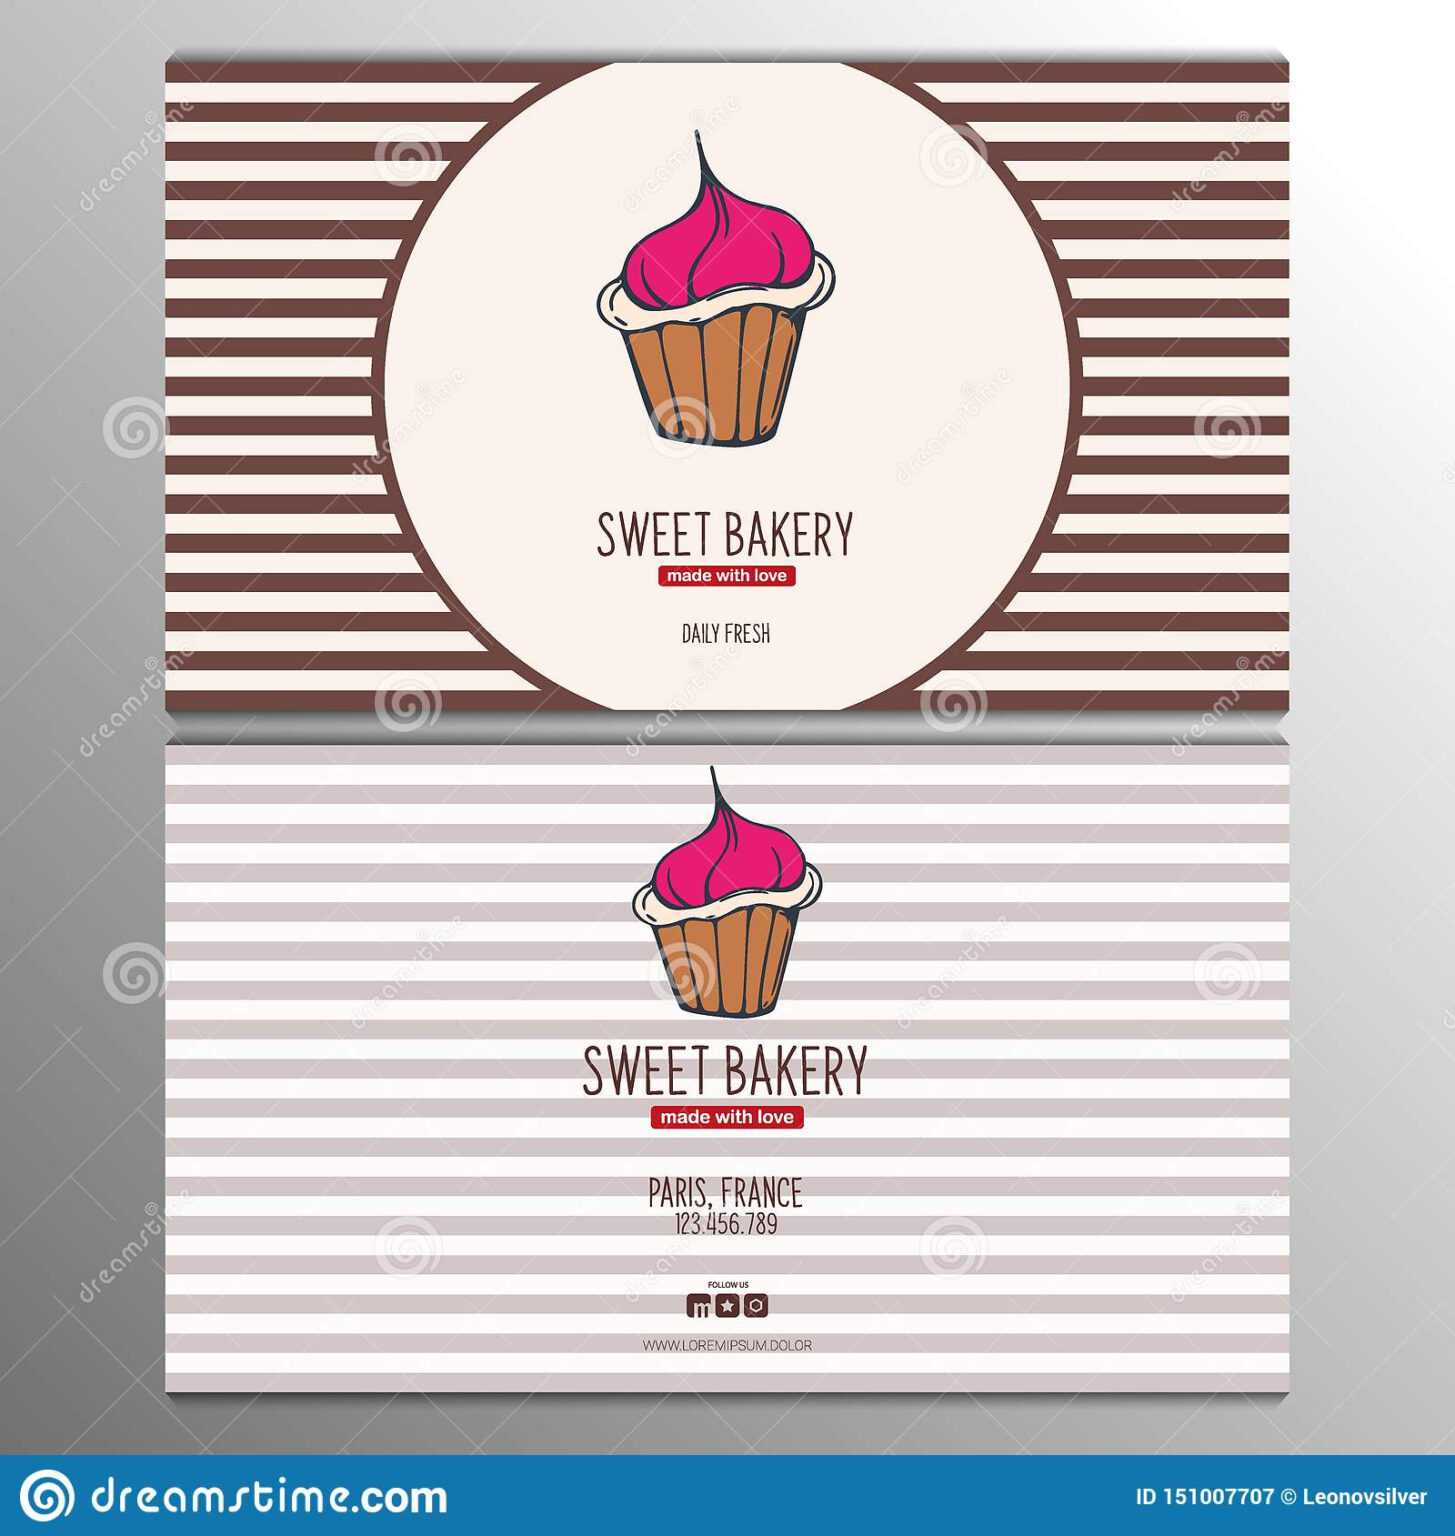 cake business cards templates free 3